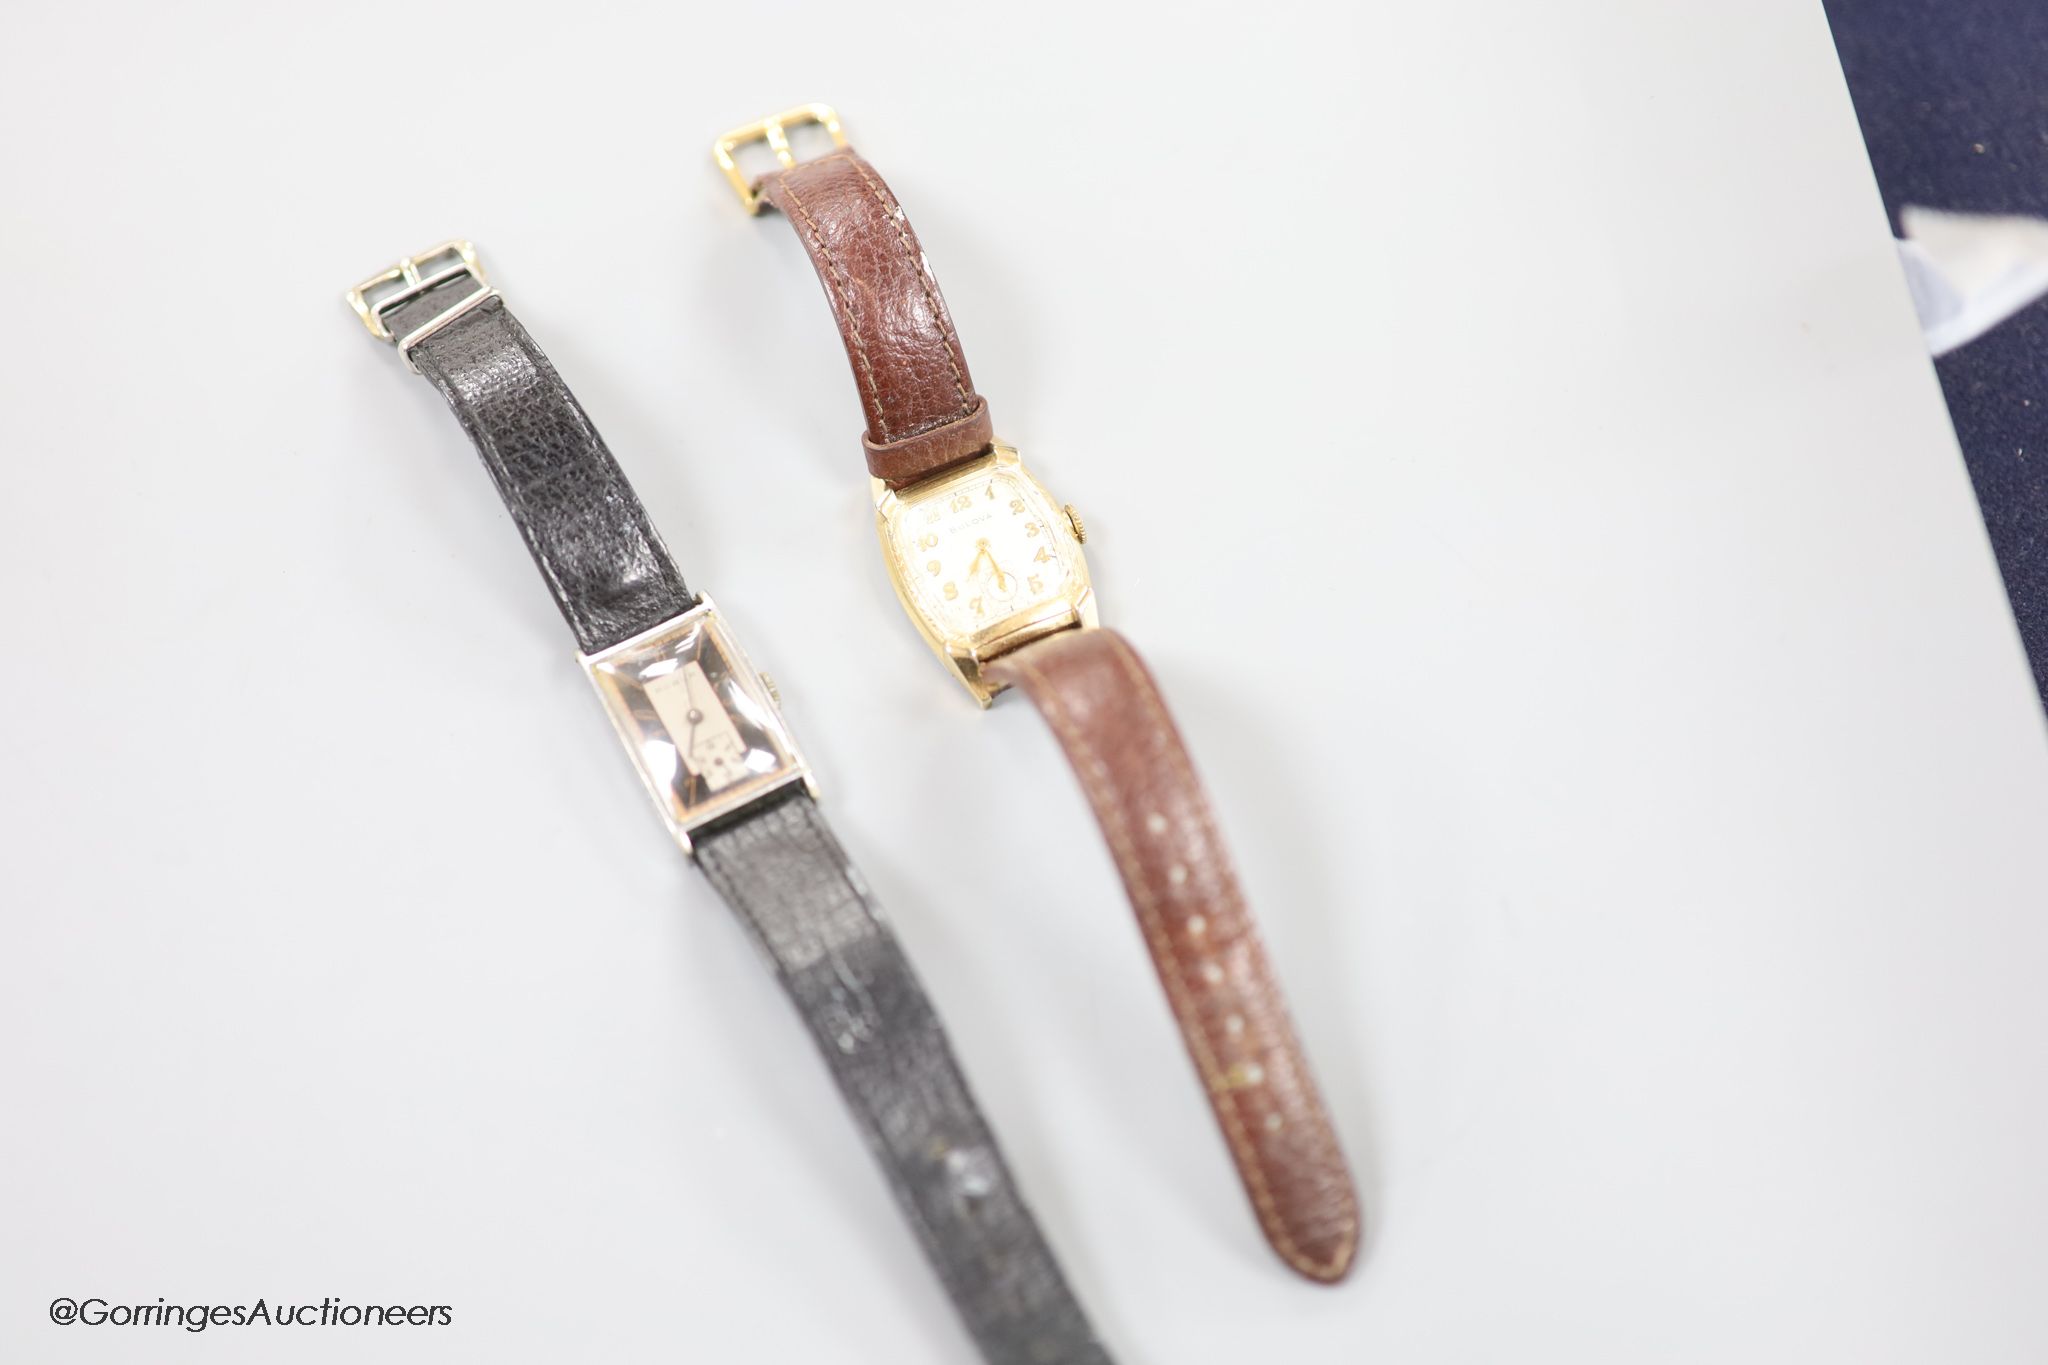 Two gentleman's mid 20th century manual wind wrist watches- gold plated and steel manual wind Bulova and a stainless steel Robur rectangular dial manual wind wrist watch.